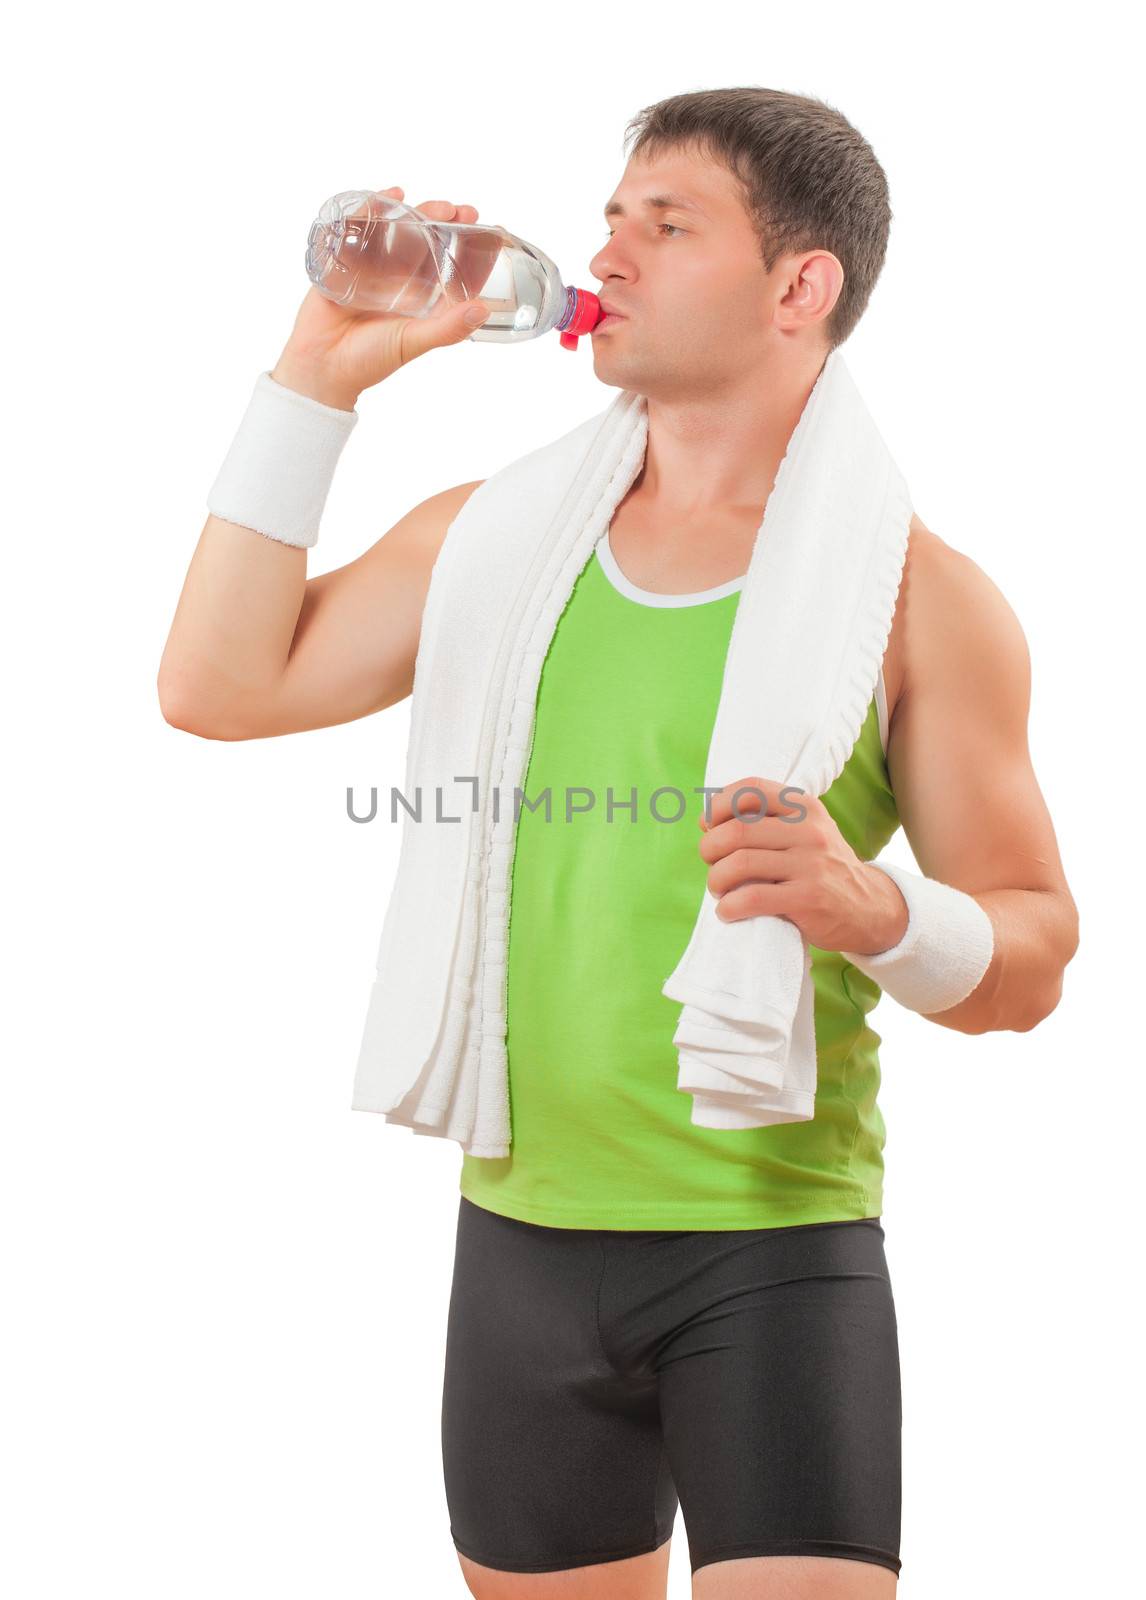 sportsman drinking water from transparent bottle isolated on whi by mihalec